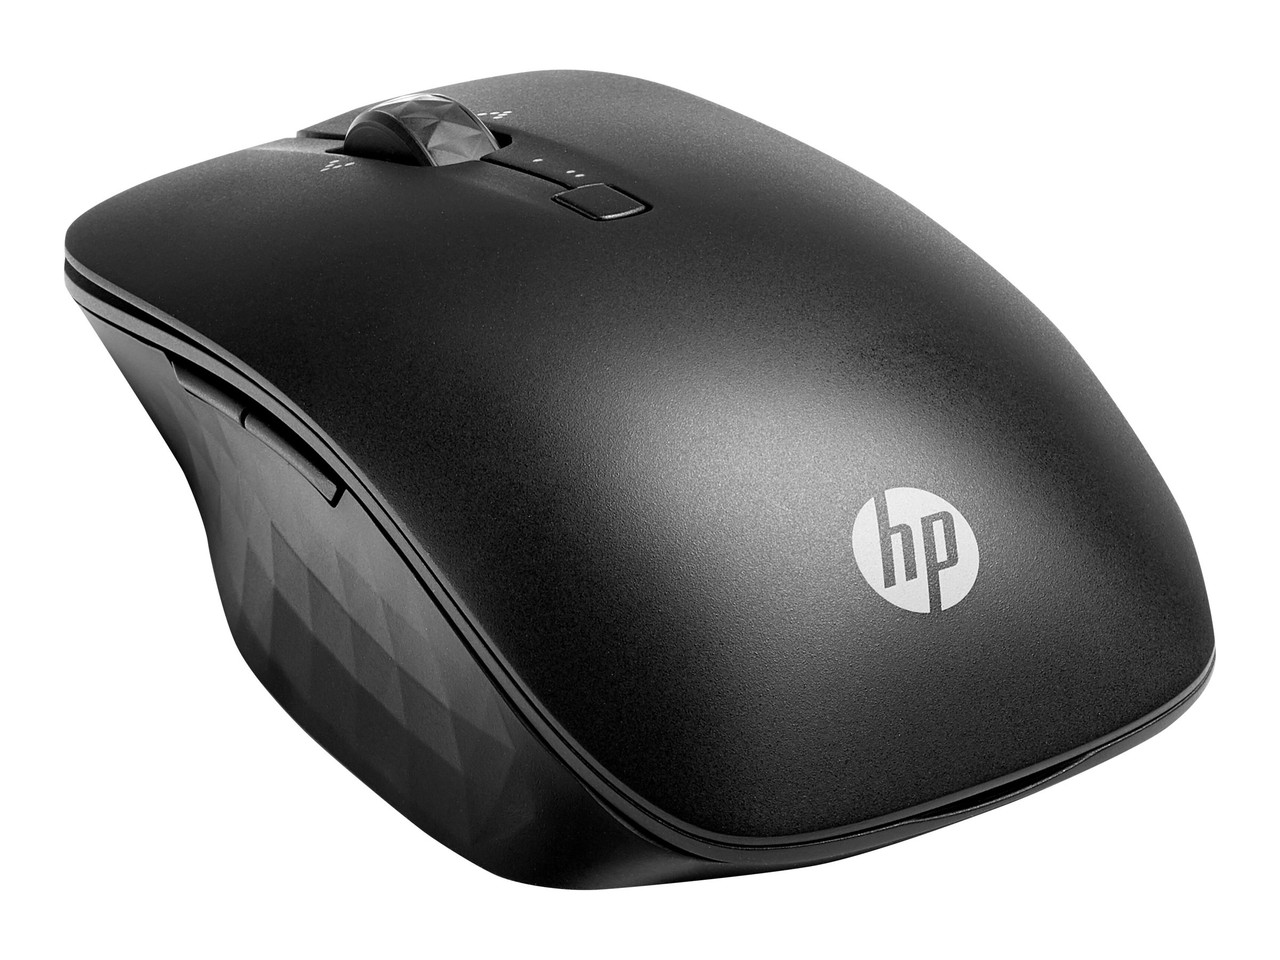 HP Blue Tooth Travel Mouse 6SP30AA (Damaged Packaging)